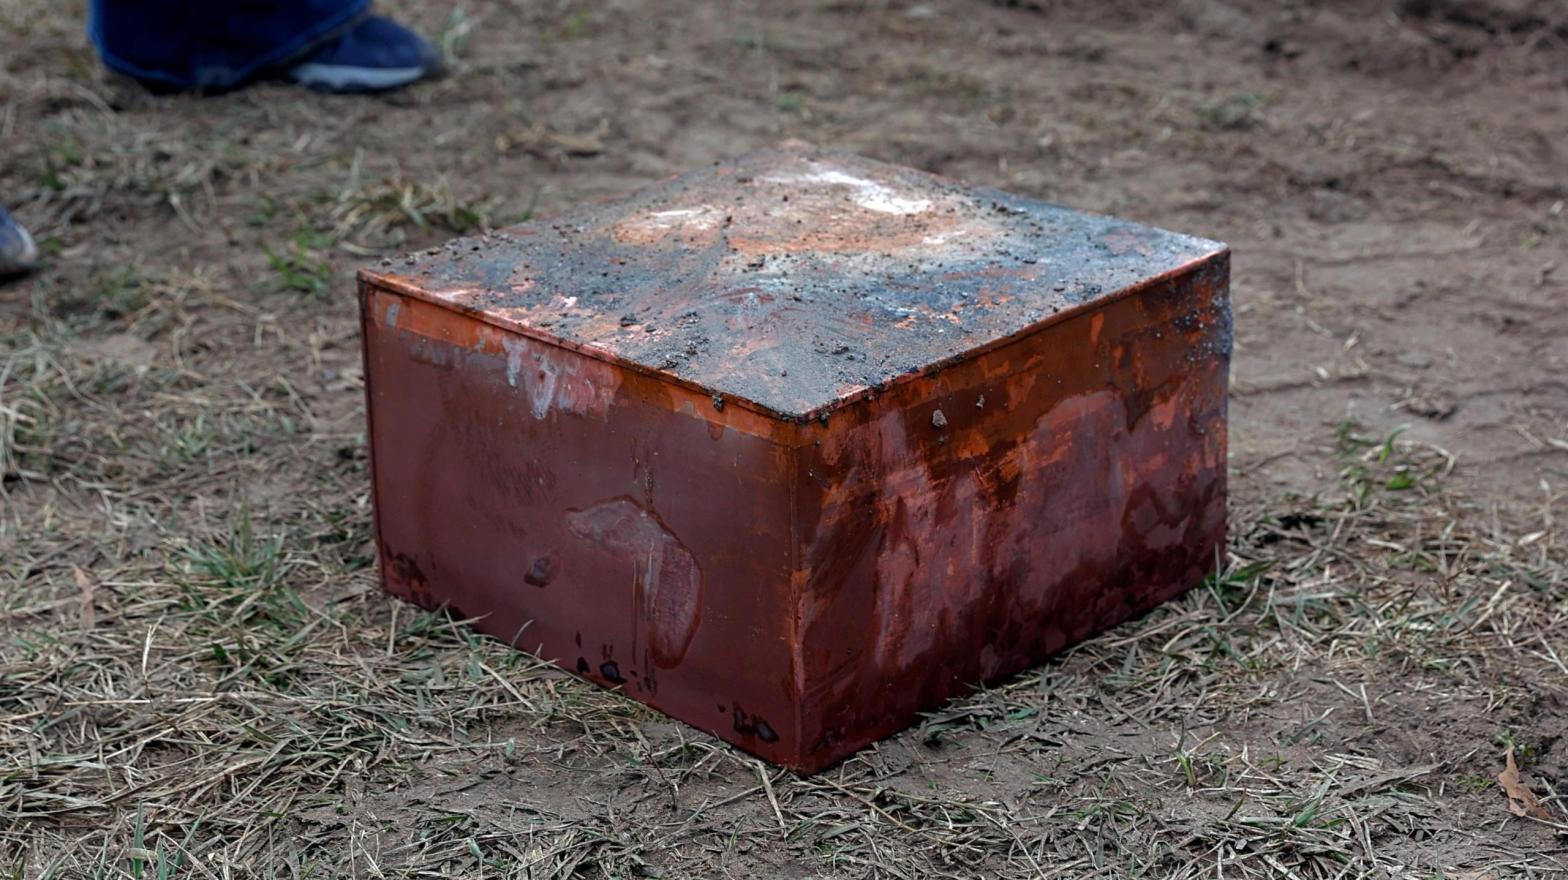 Workers recover a box believed to be the 1887 time capsule that was put under Confederate Gen. Robert E. Lee's statue pedestal in Richmond, Va., Dec. 27, 2021. (Photo: Eva Russo/Richmond Times-Dispatch, AP)